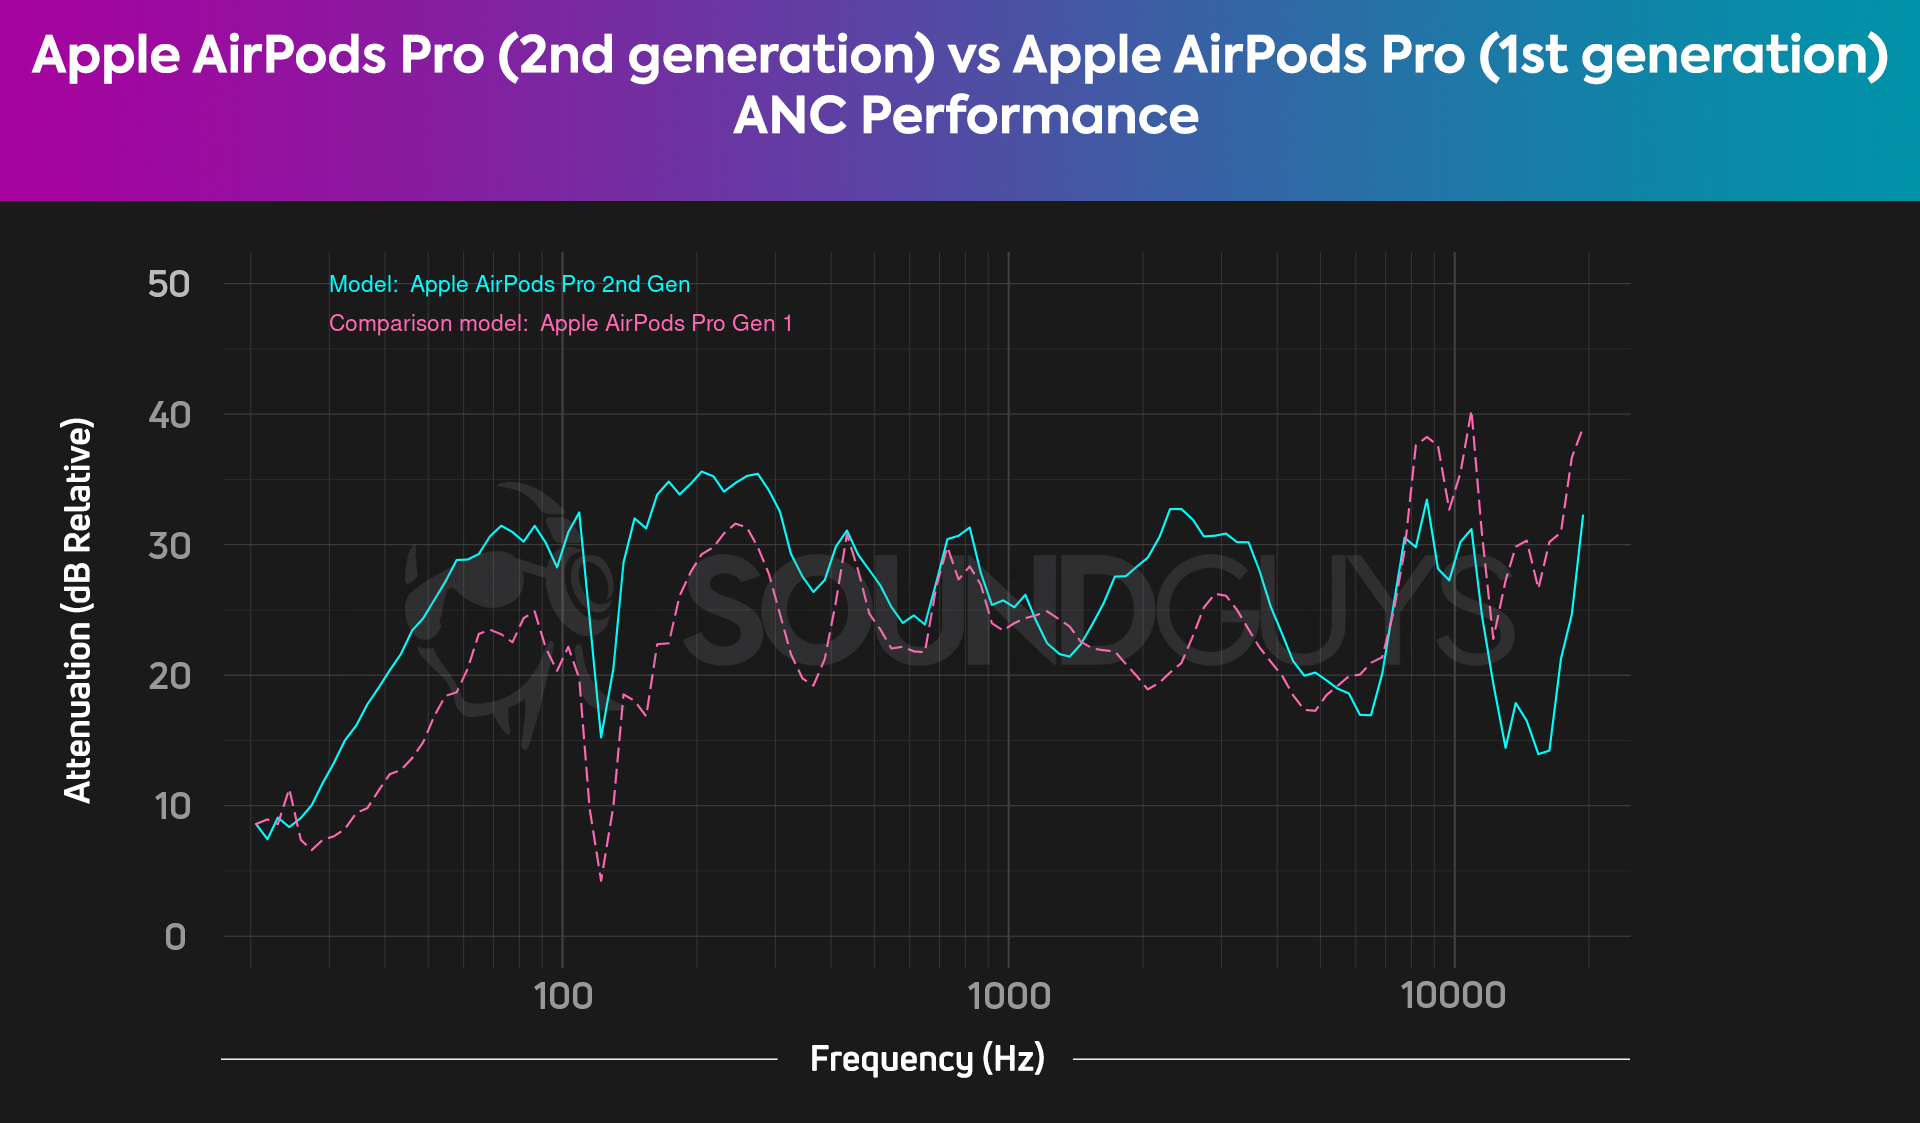 A noise canceling comparison chart for the Apple AirPods Pro (1st generation) and Apple AirPods Pro (2nd generation), which shows better attenuation across the frequency spectrum from the newer model.